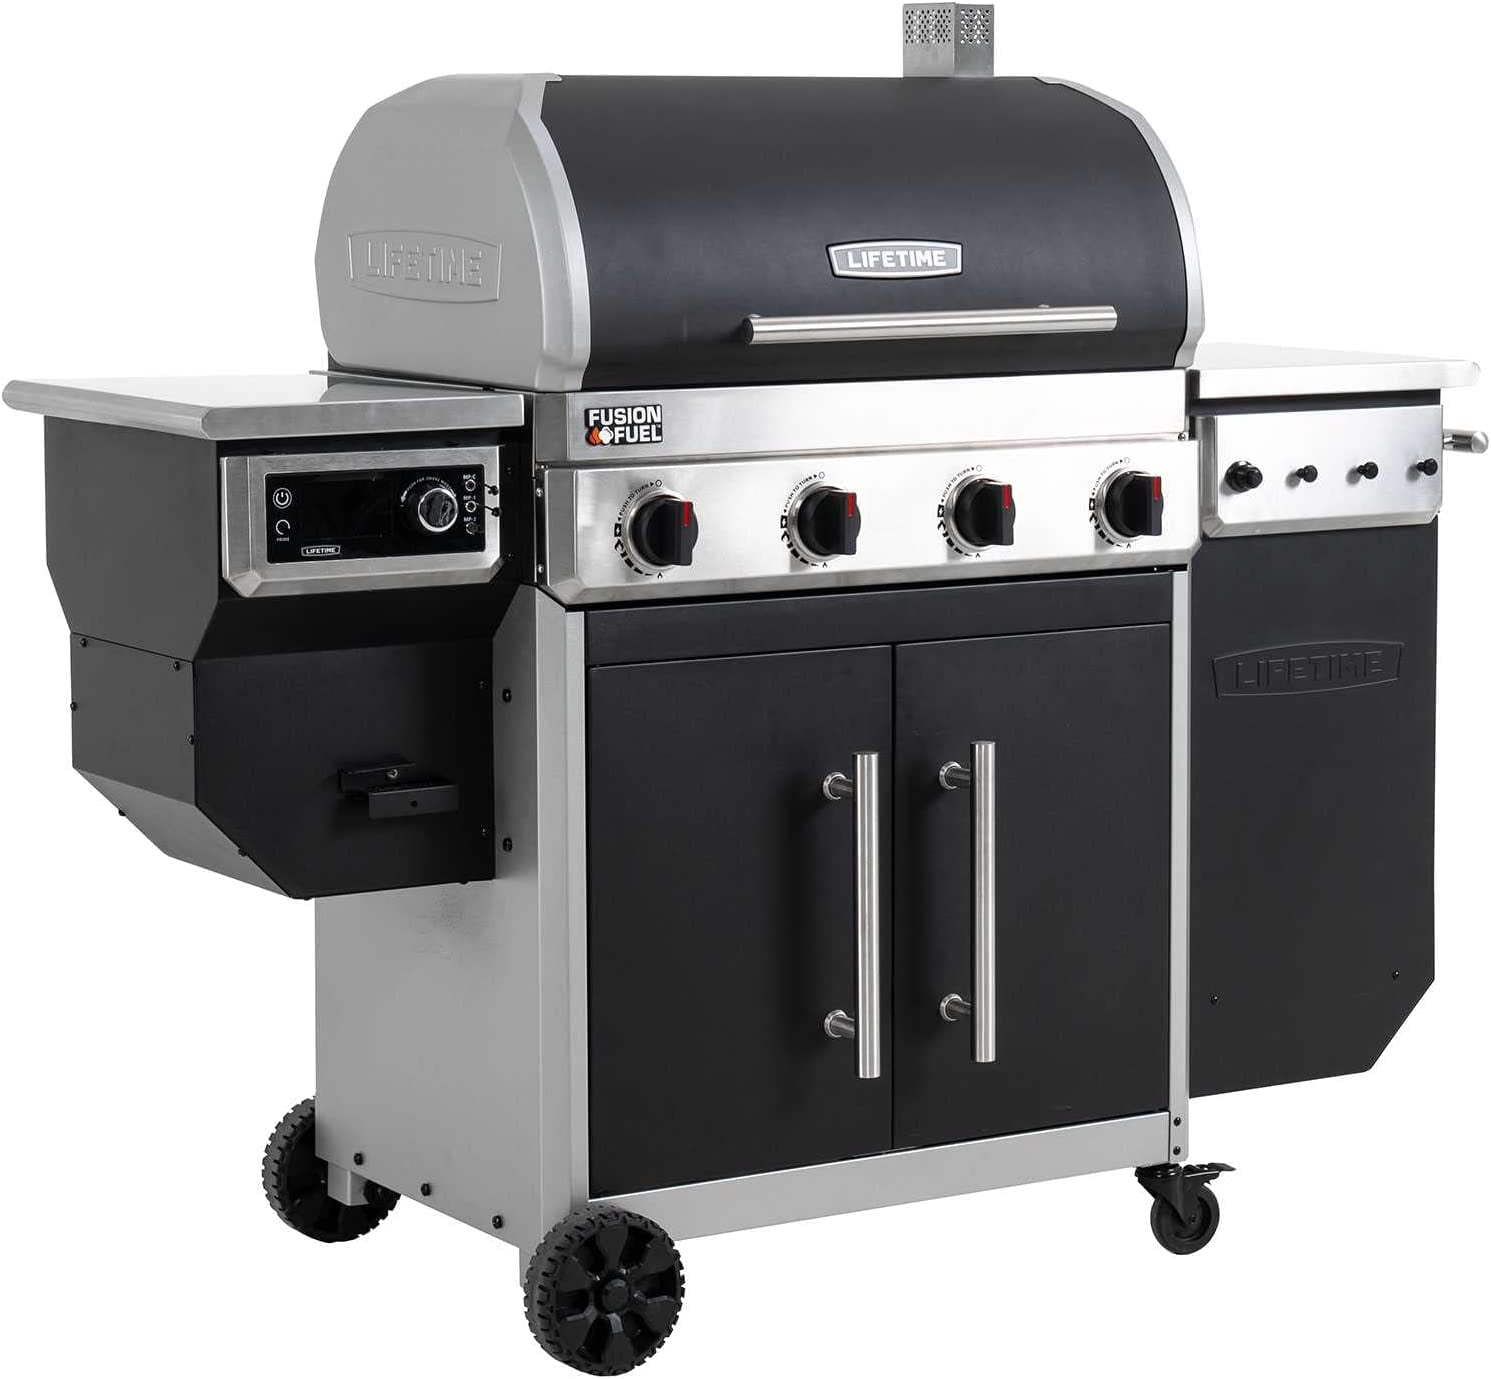 Lifetime Gas Grill and Wood Pellet Smoker Combo, WiFi and Bluetooth Control Technology - image 1 of 7